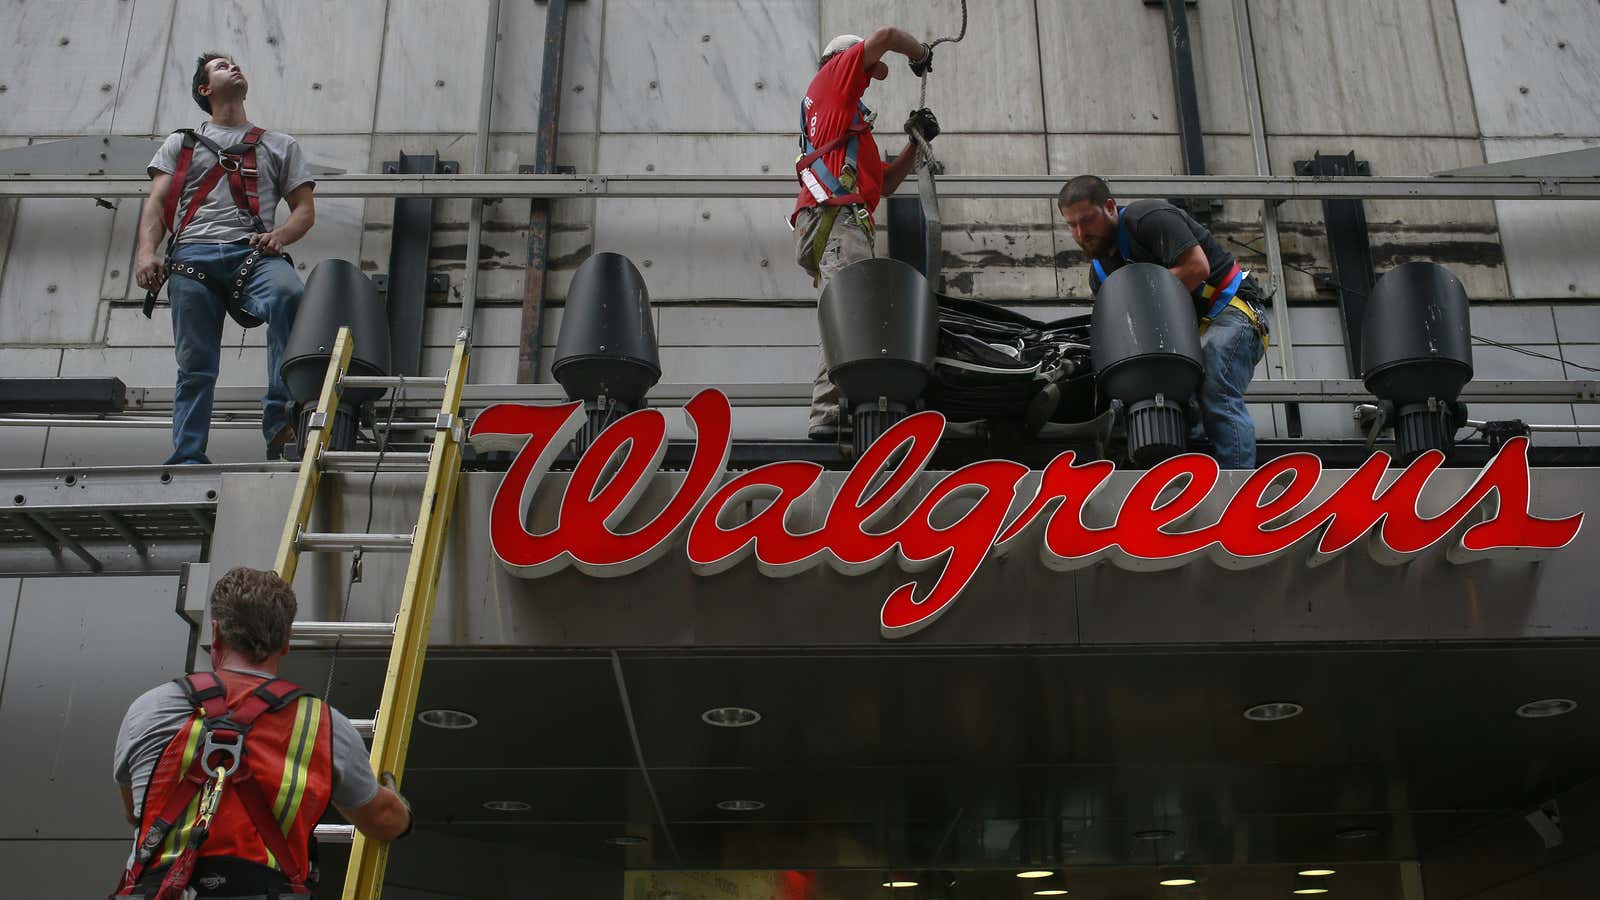 Everyone works for Walgreens